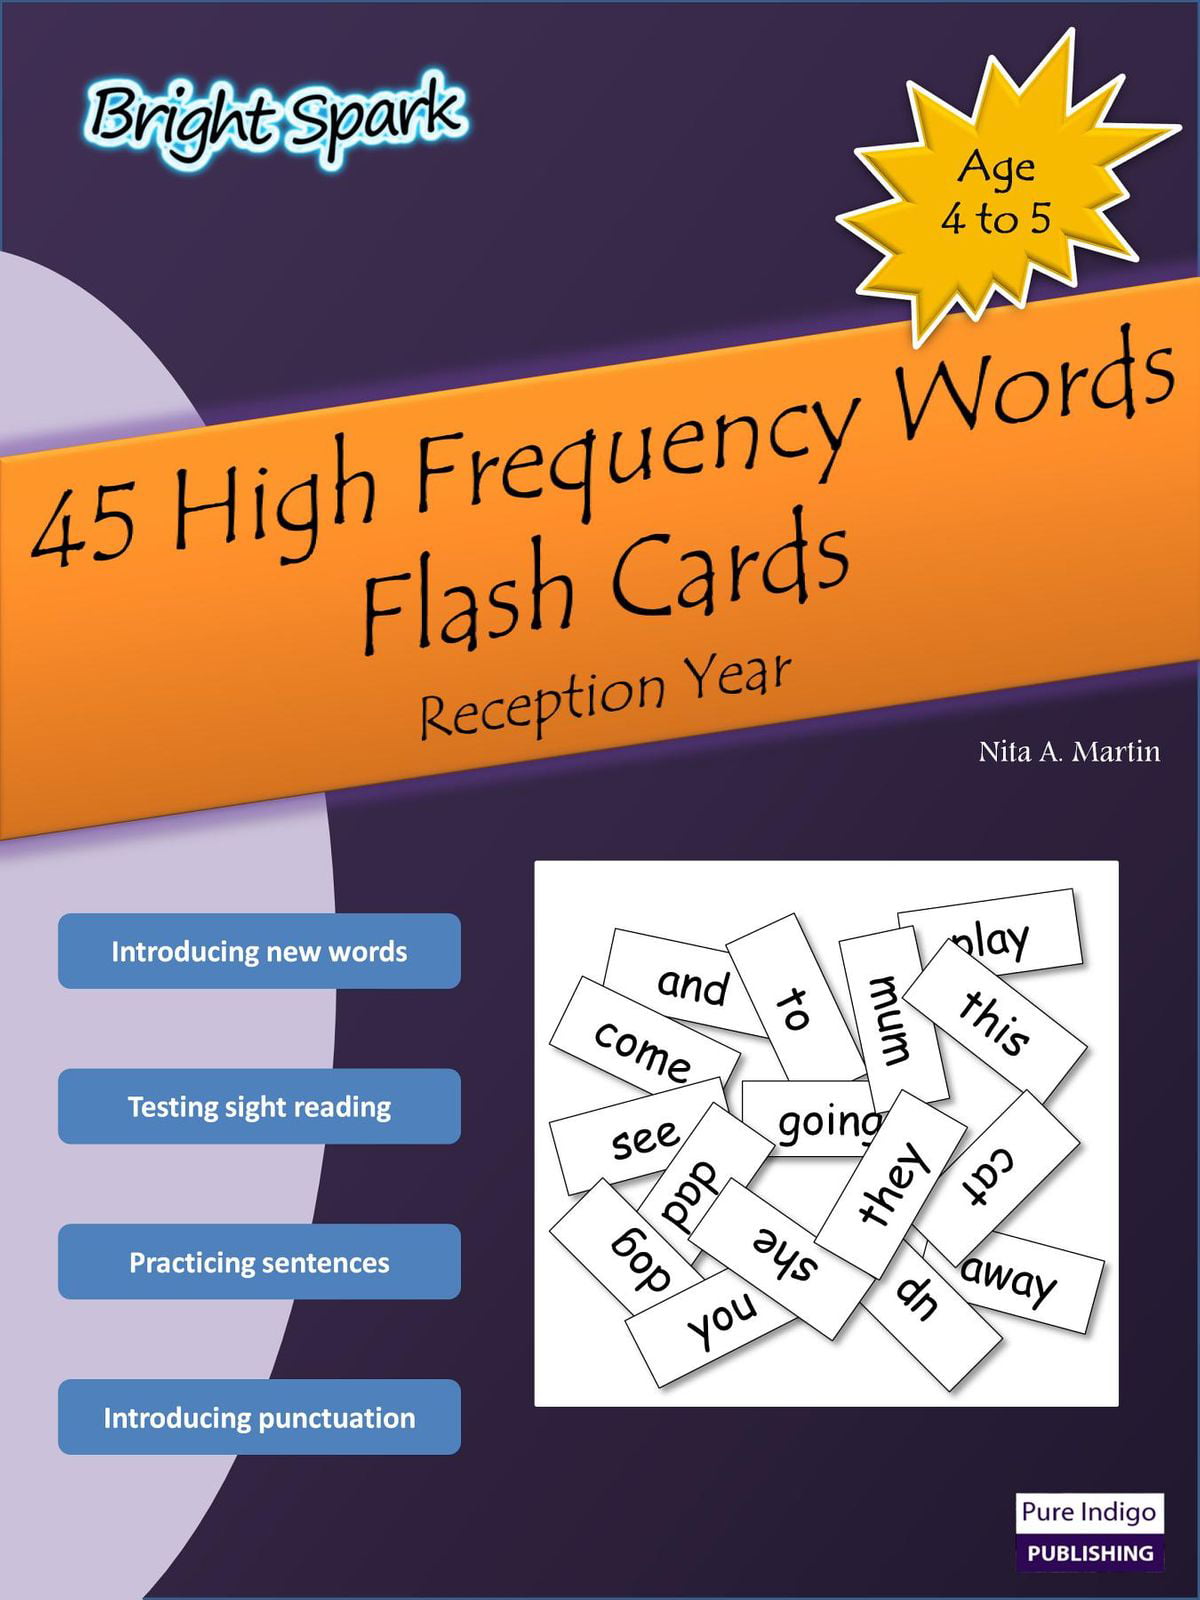 fry-sight-word-flash-cards-the-first-100-high-frequency-words